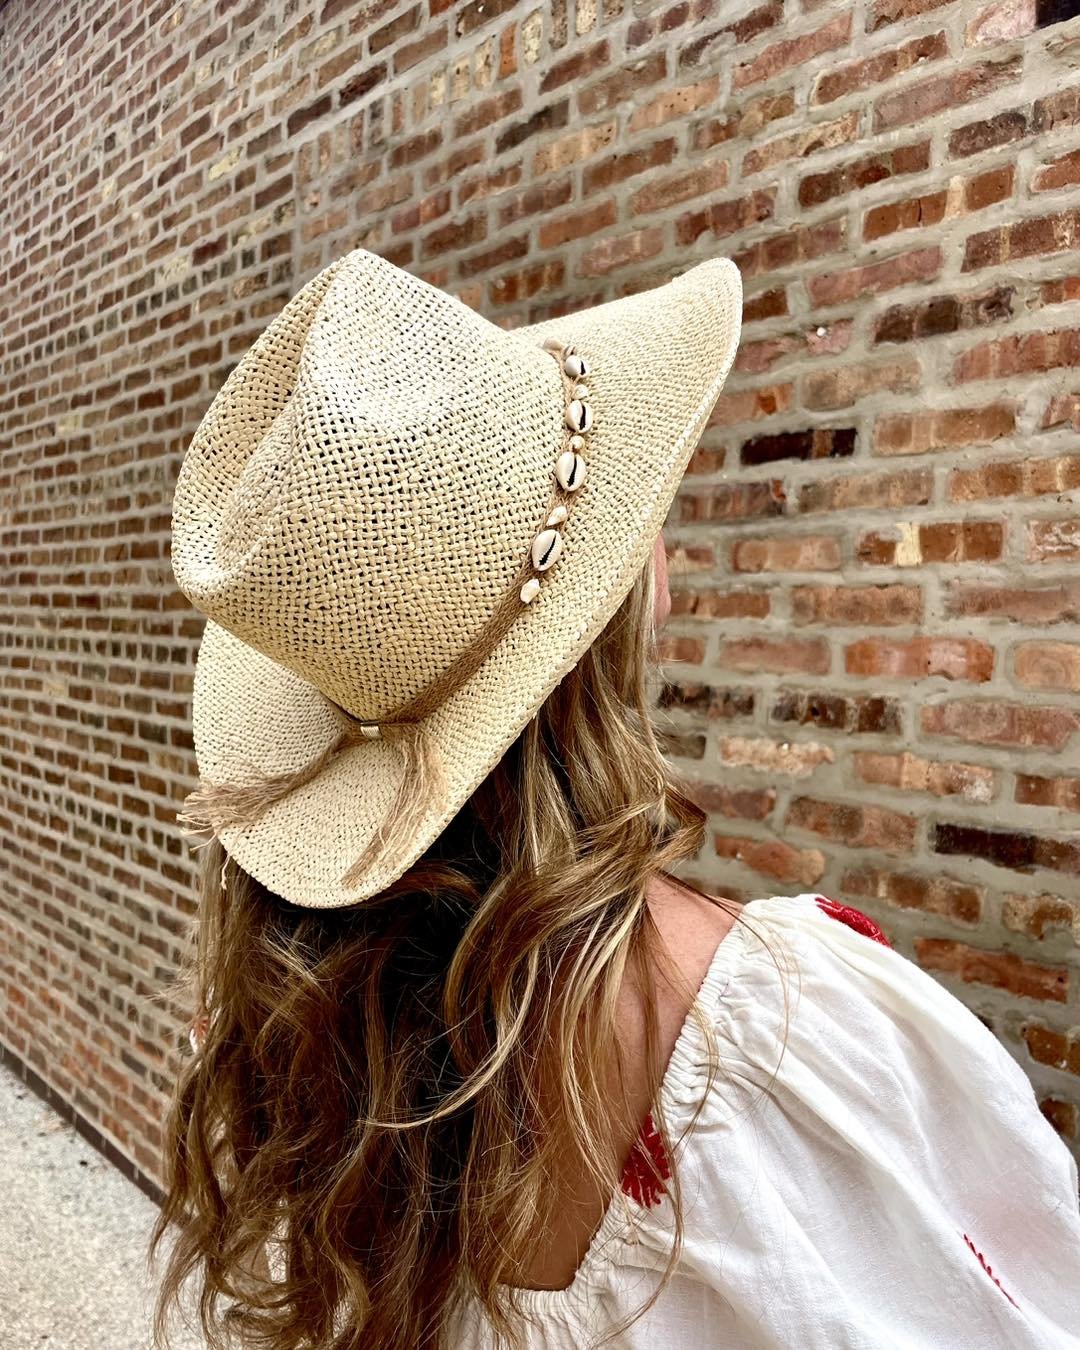 Another sneak peek on what&rsquo;s in store for Sequels Spring into Summer SALE! 🤠

We&rsquo;ve stocked up on the cowgirl hats for you guys this summer! Get them for 20% OFF FRIDAY AND SATURDAY!!👏🛍️